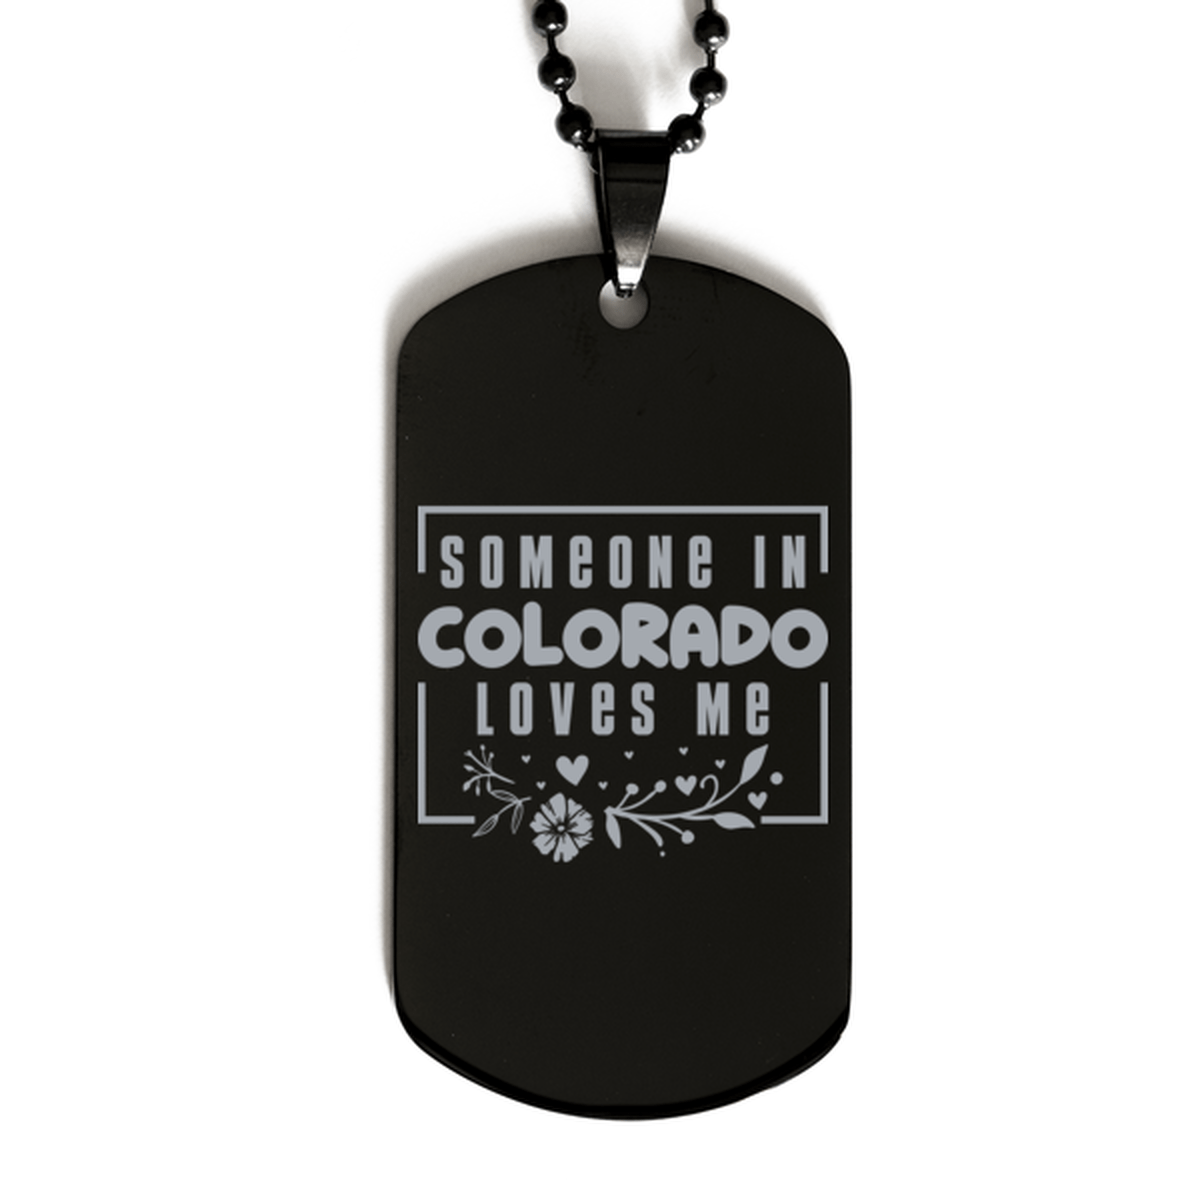 Cute Colorado Black Dog Tag Necklace, Someone in Colorado Loves Me, Best Birthday Gifts from Colorado Friends & Family